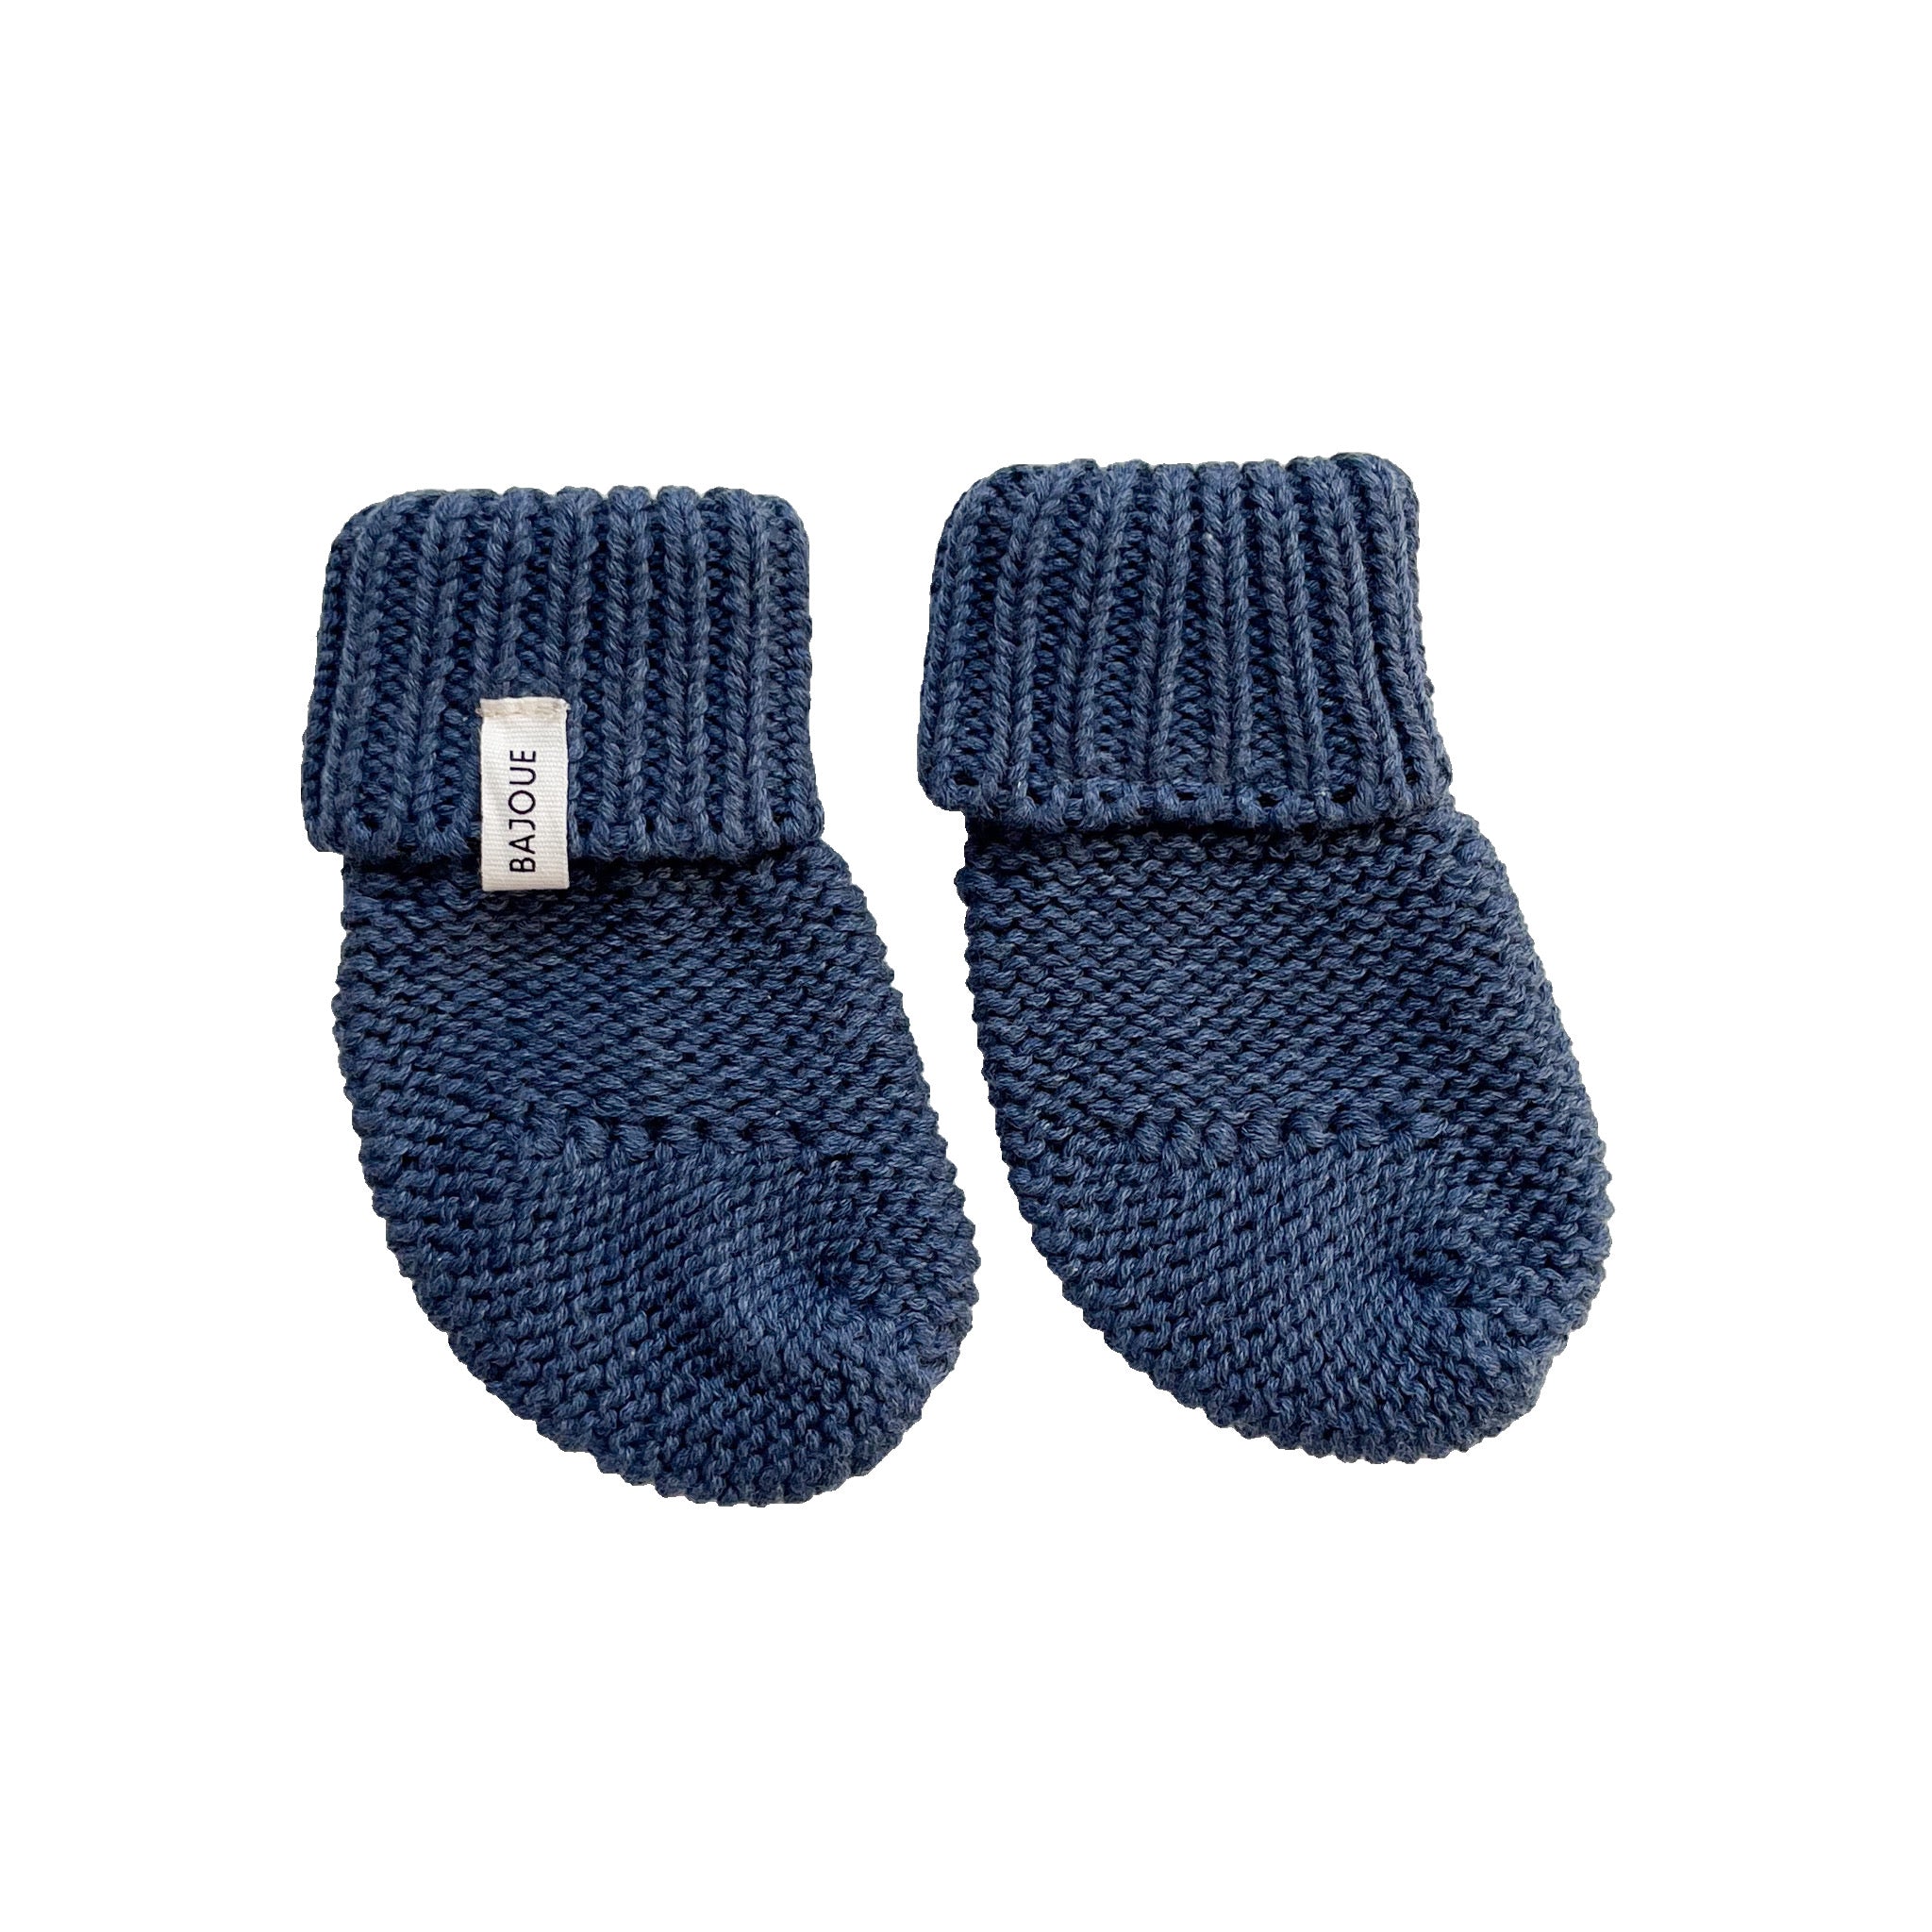 Knitted Baby Booties - Navy